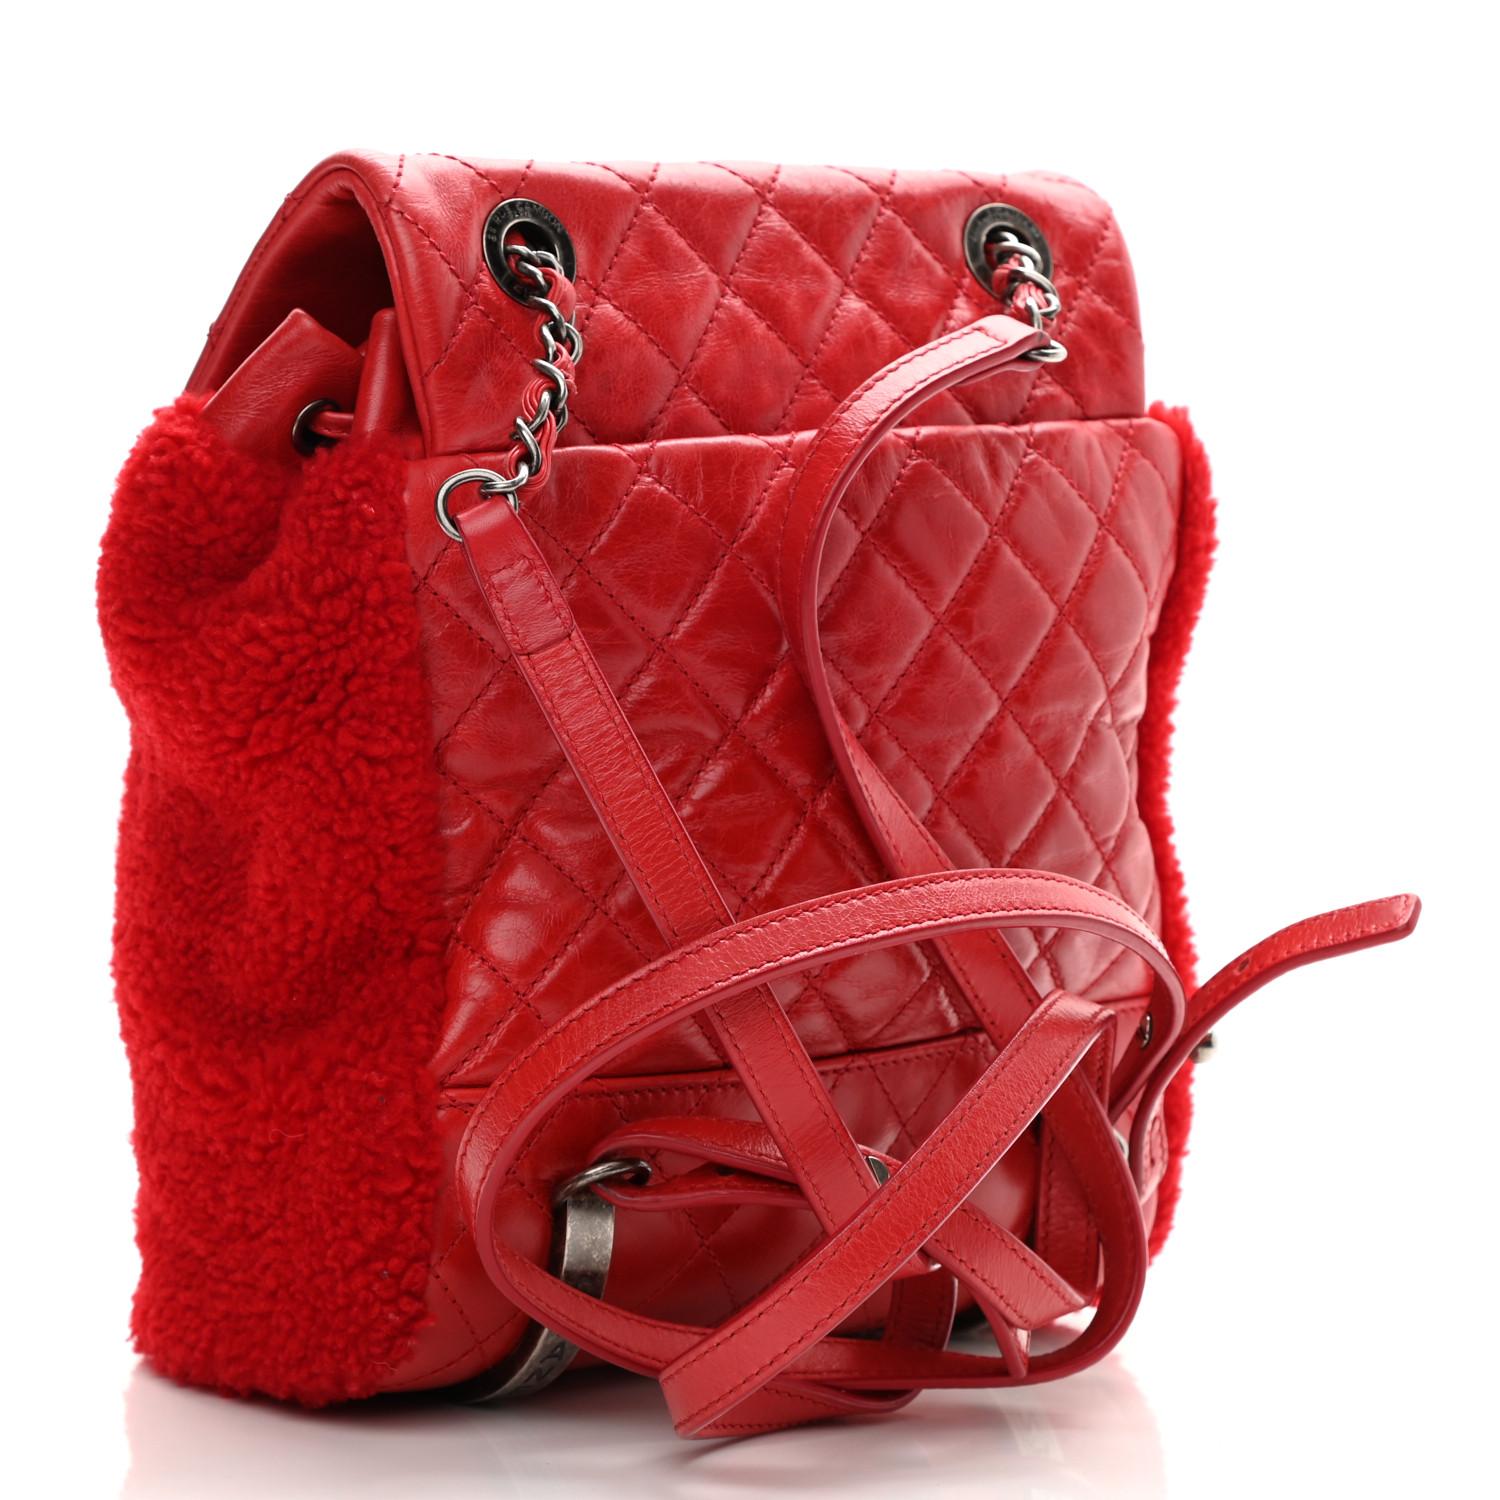 Chanel Paris-Salzburg Mountain Red Shearling Leather Rucksack Backpack

Year: 2015

From the Pre-Fall 2015 Collection by Karl Lagerfeld
Red Shearling
Interlocking CC Logo & Quilted Pattern
Antiqued Silver-Tone Hardware
Calf Hair Trim
Chain-Link